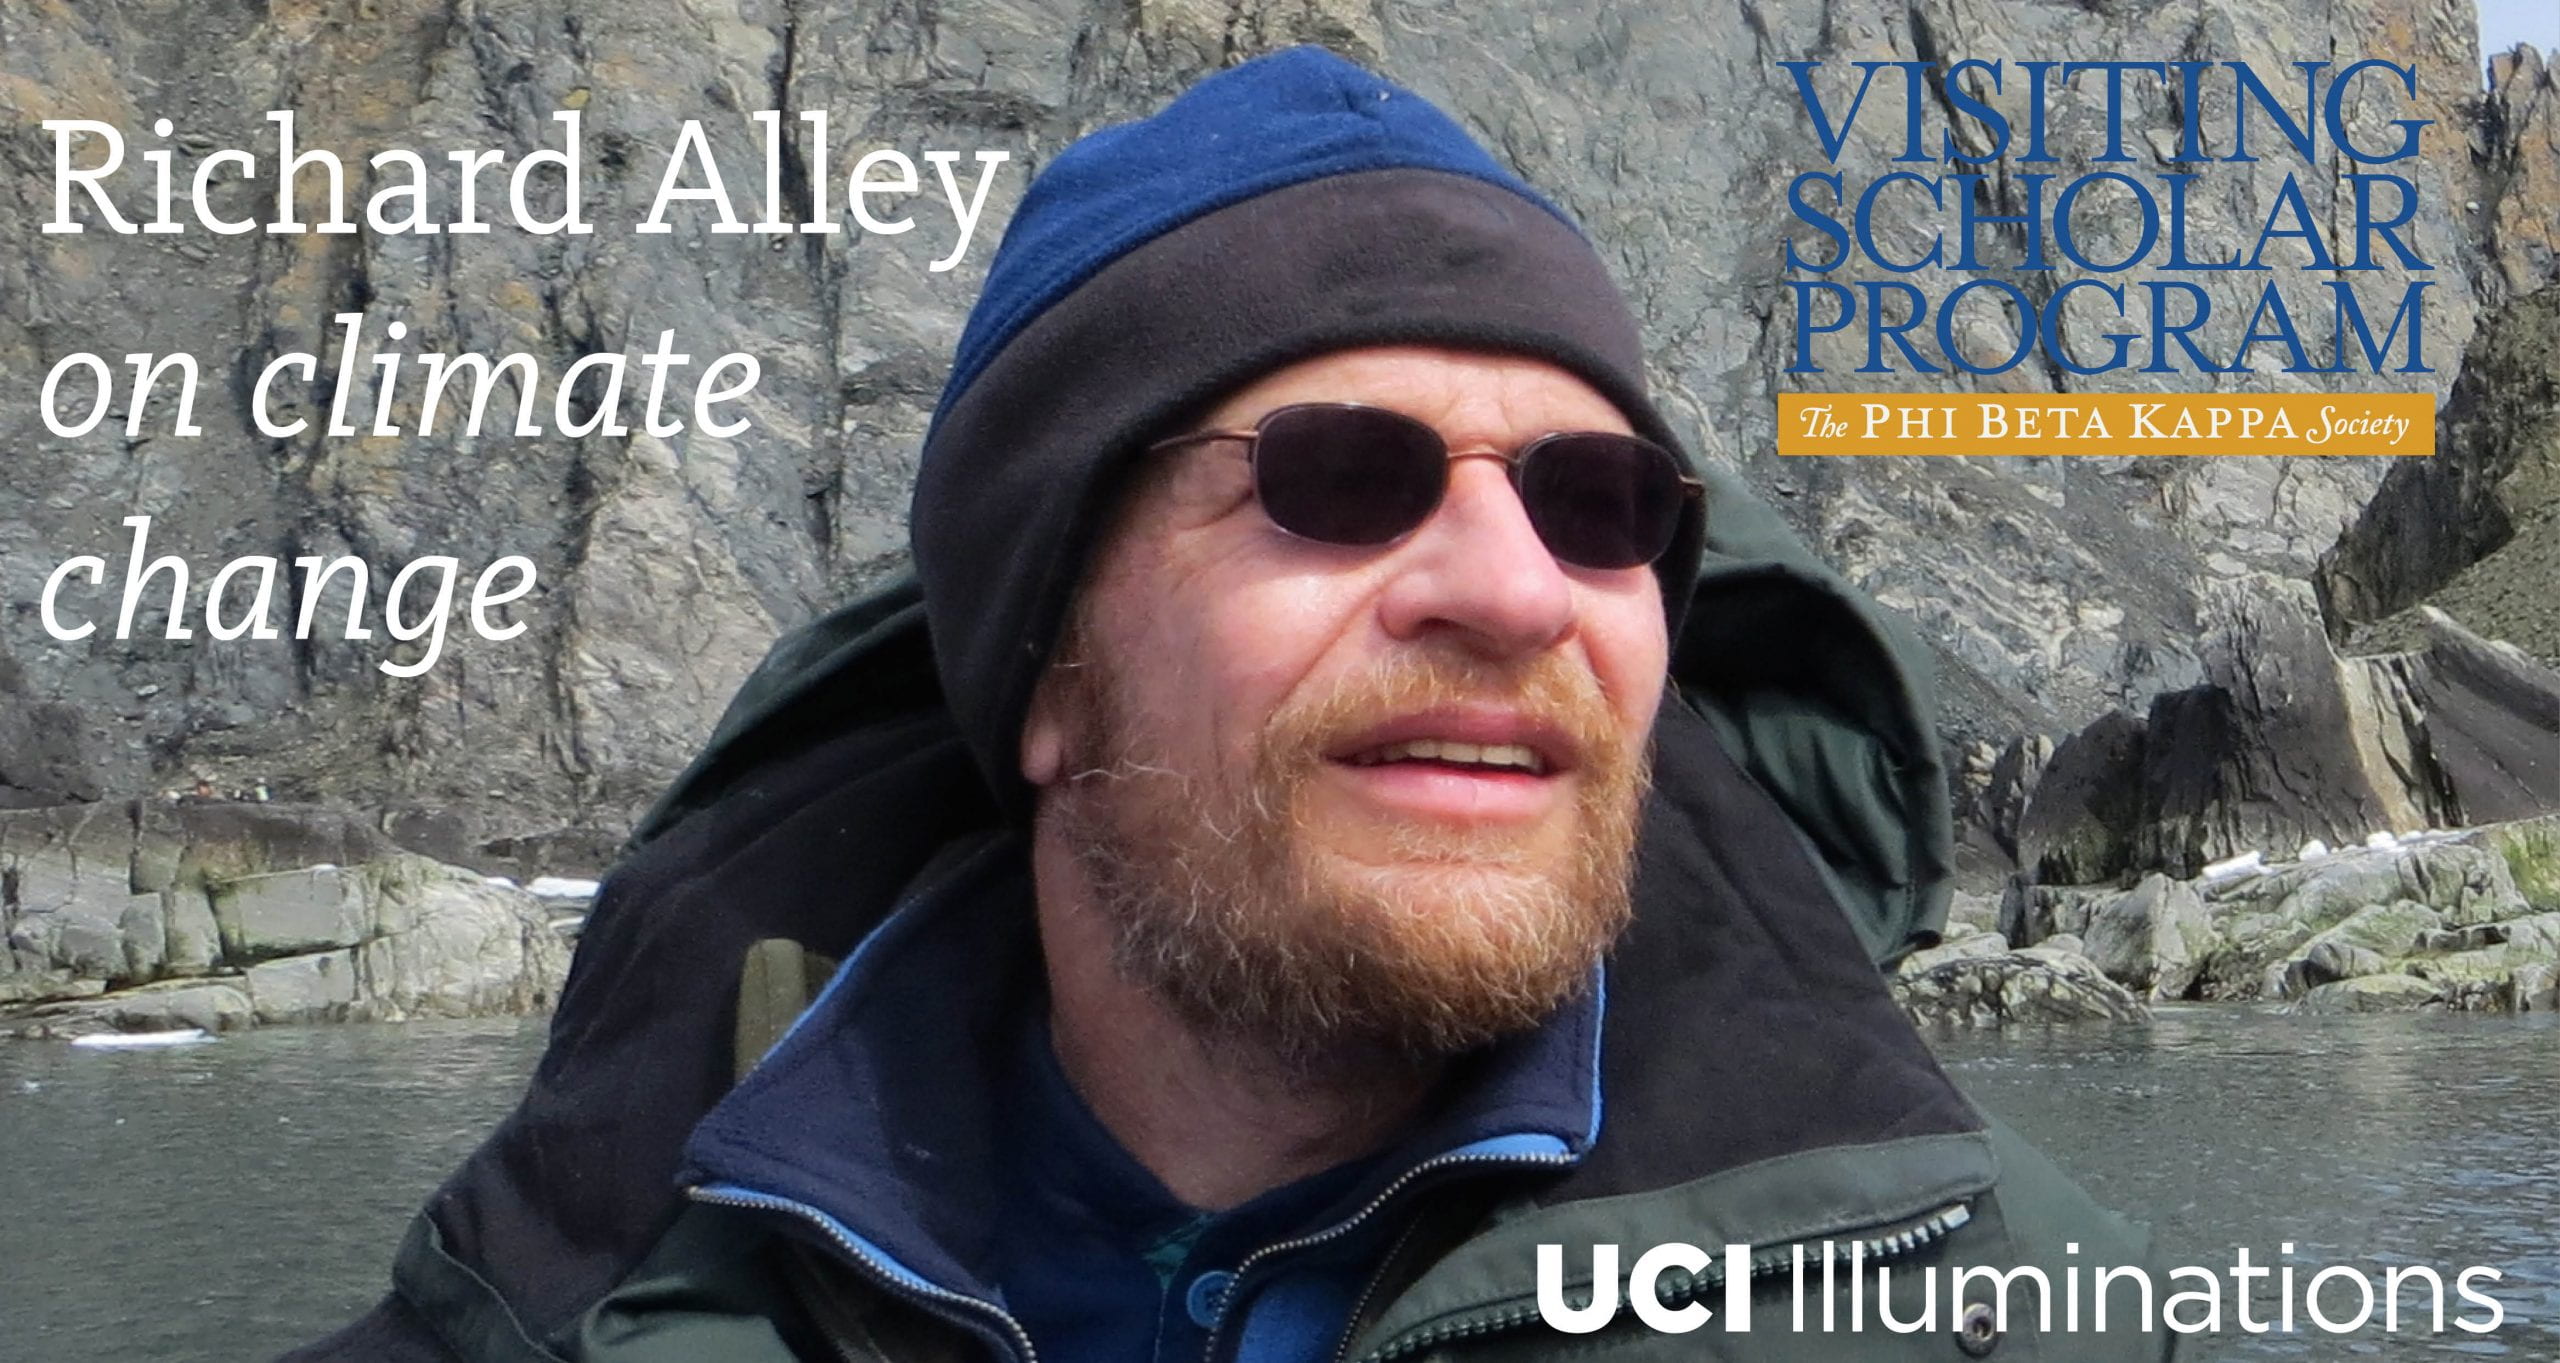 POSTPONED – Richard Alley, “Finding the Good News on Energy and Environment” – 3/10/20